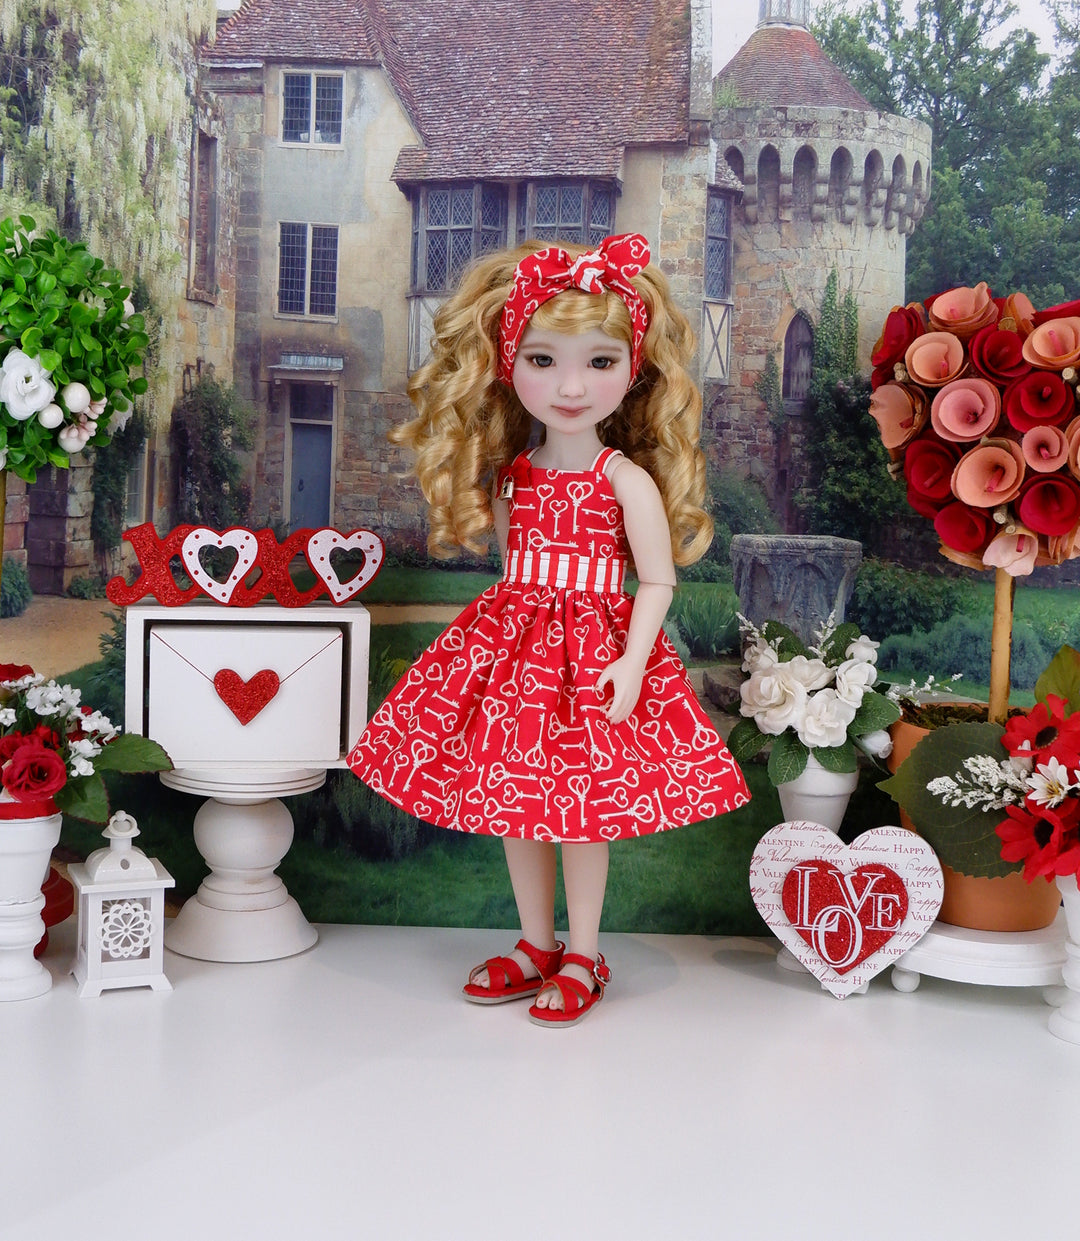 Key to Love - dress with shoes for Ruby Red Fashion Friends doll